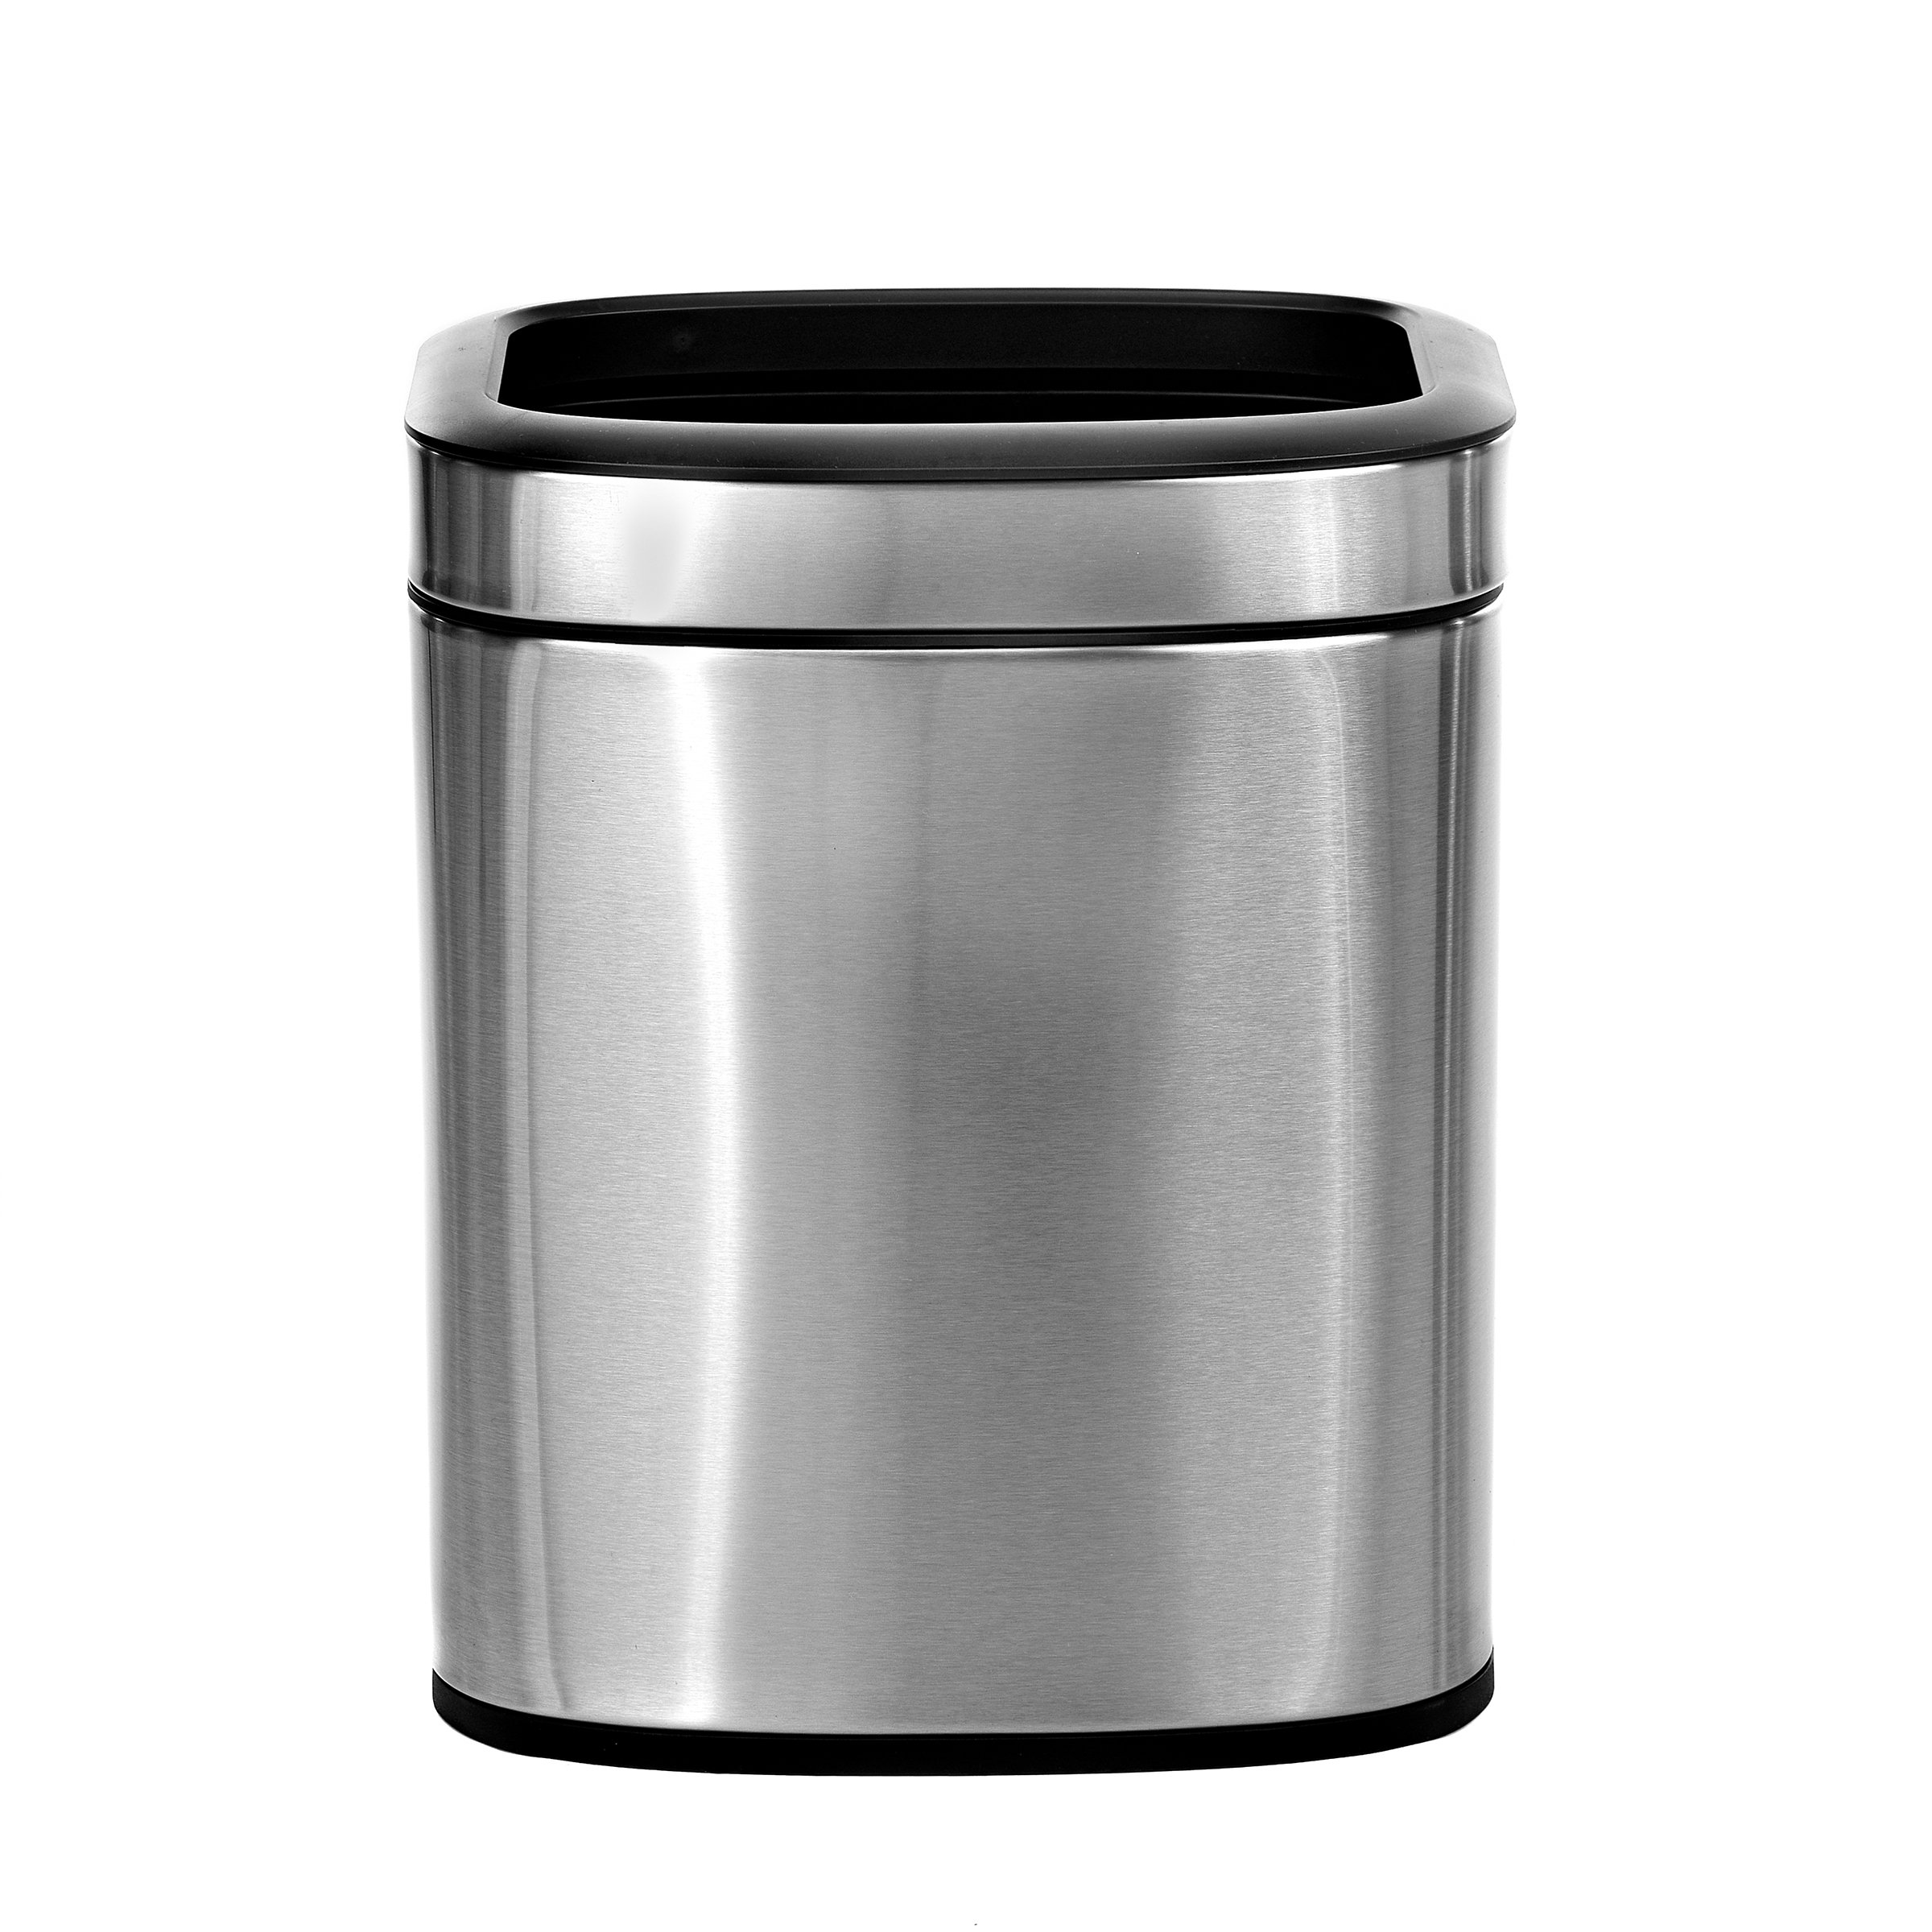 Kitchen Compost Bin - 6L / 1.6GAL Stainless Steel Compost